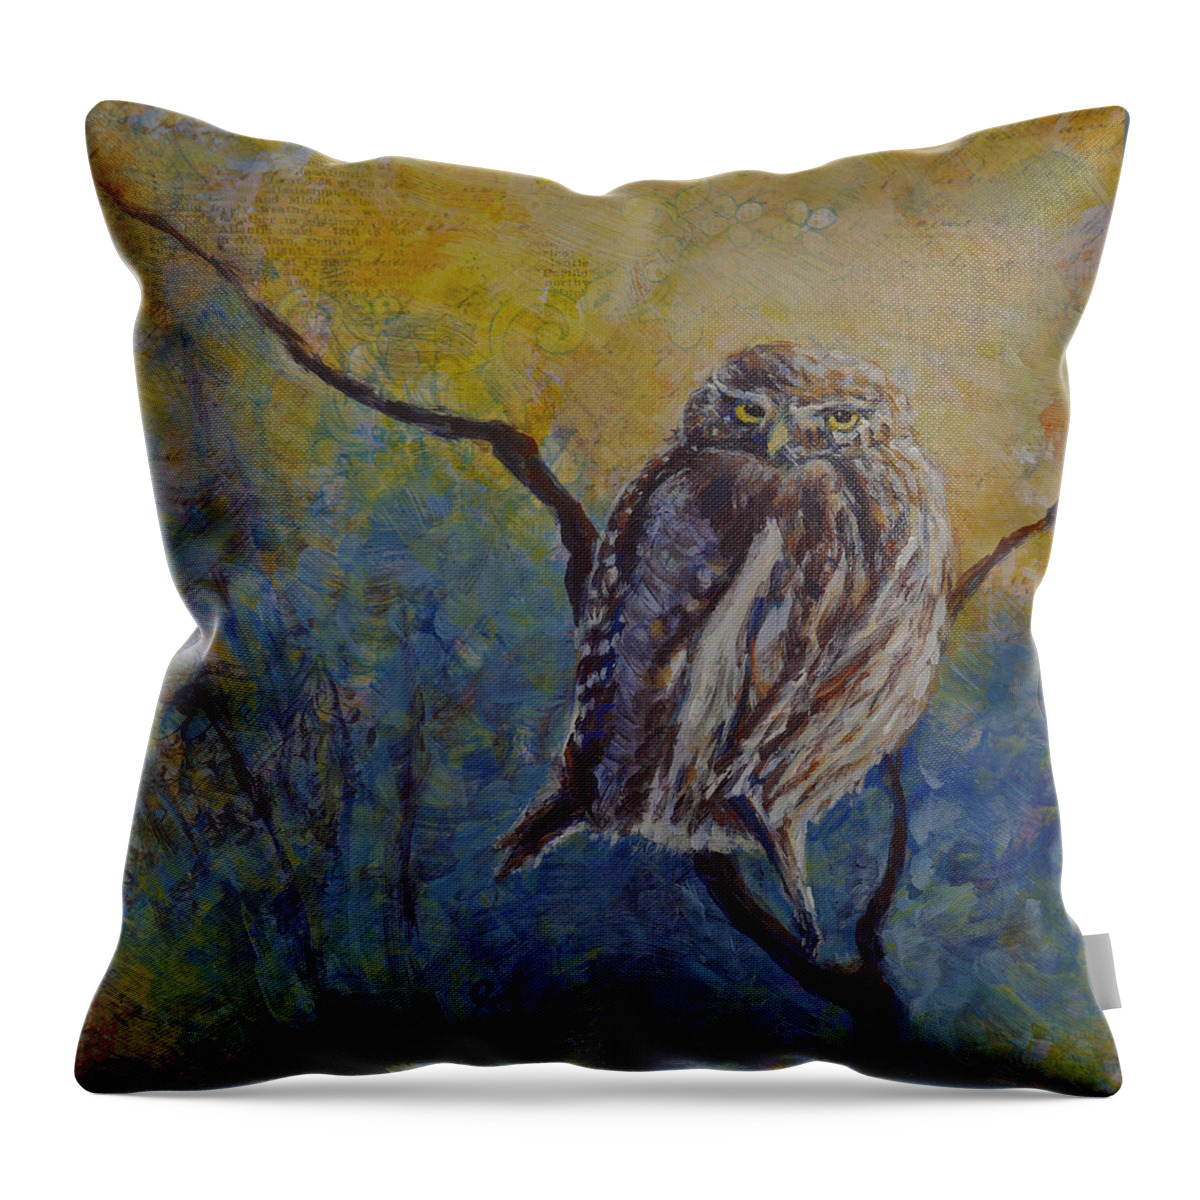 Gina G Throw Pillow featuring the painting The Wise One by Gina Grundemann